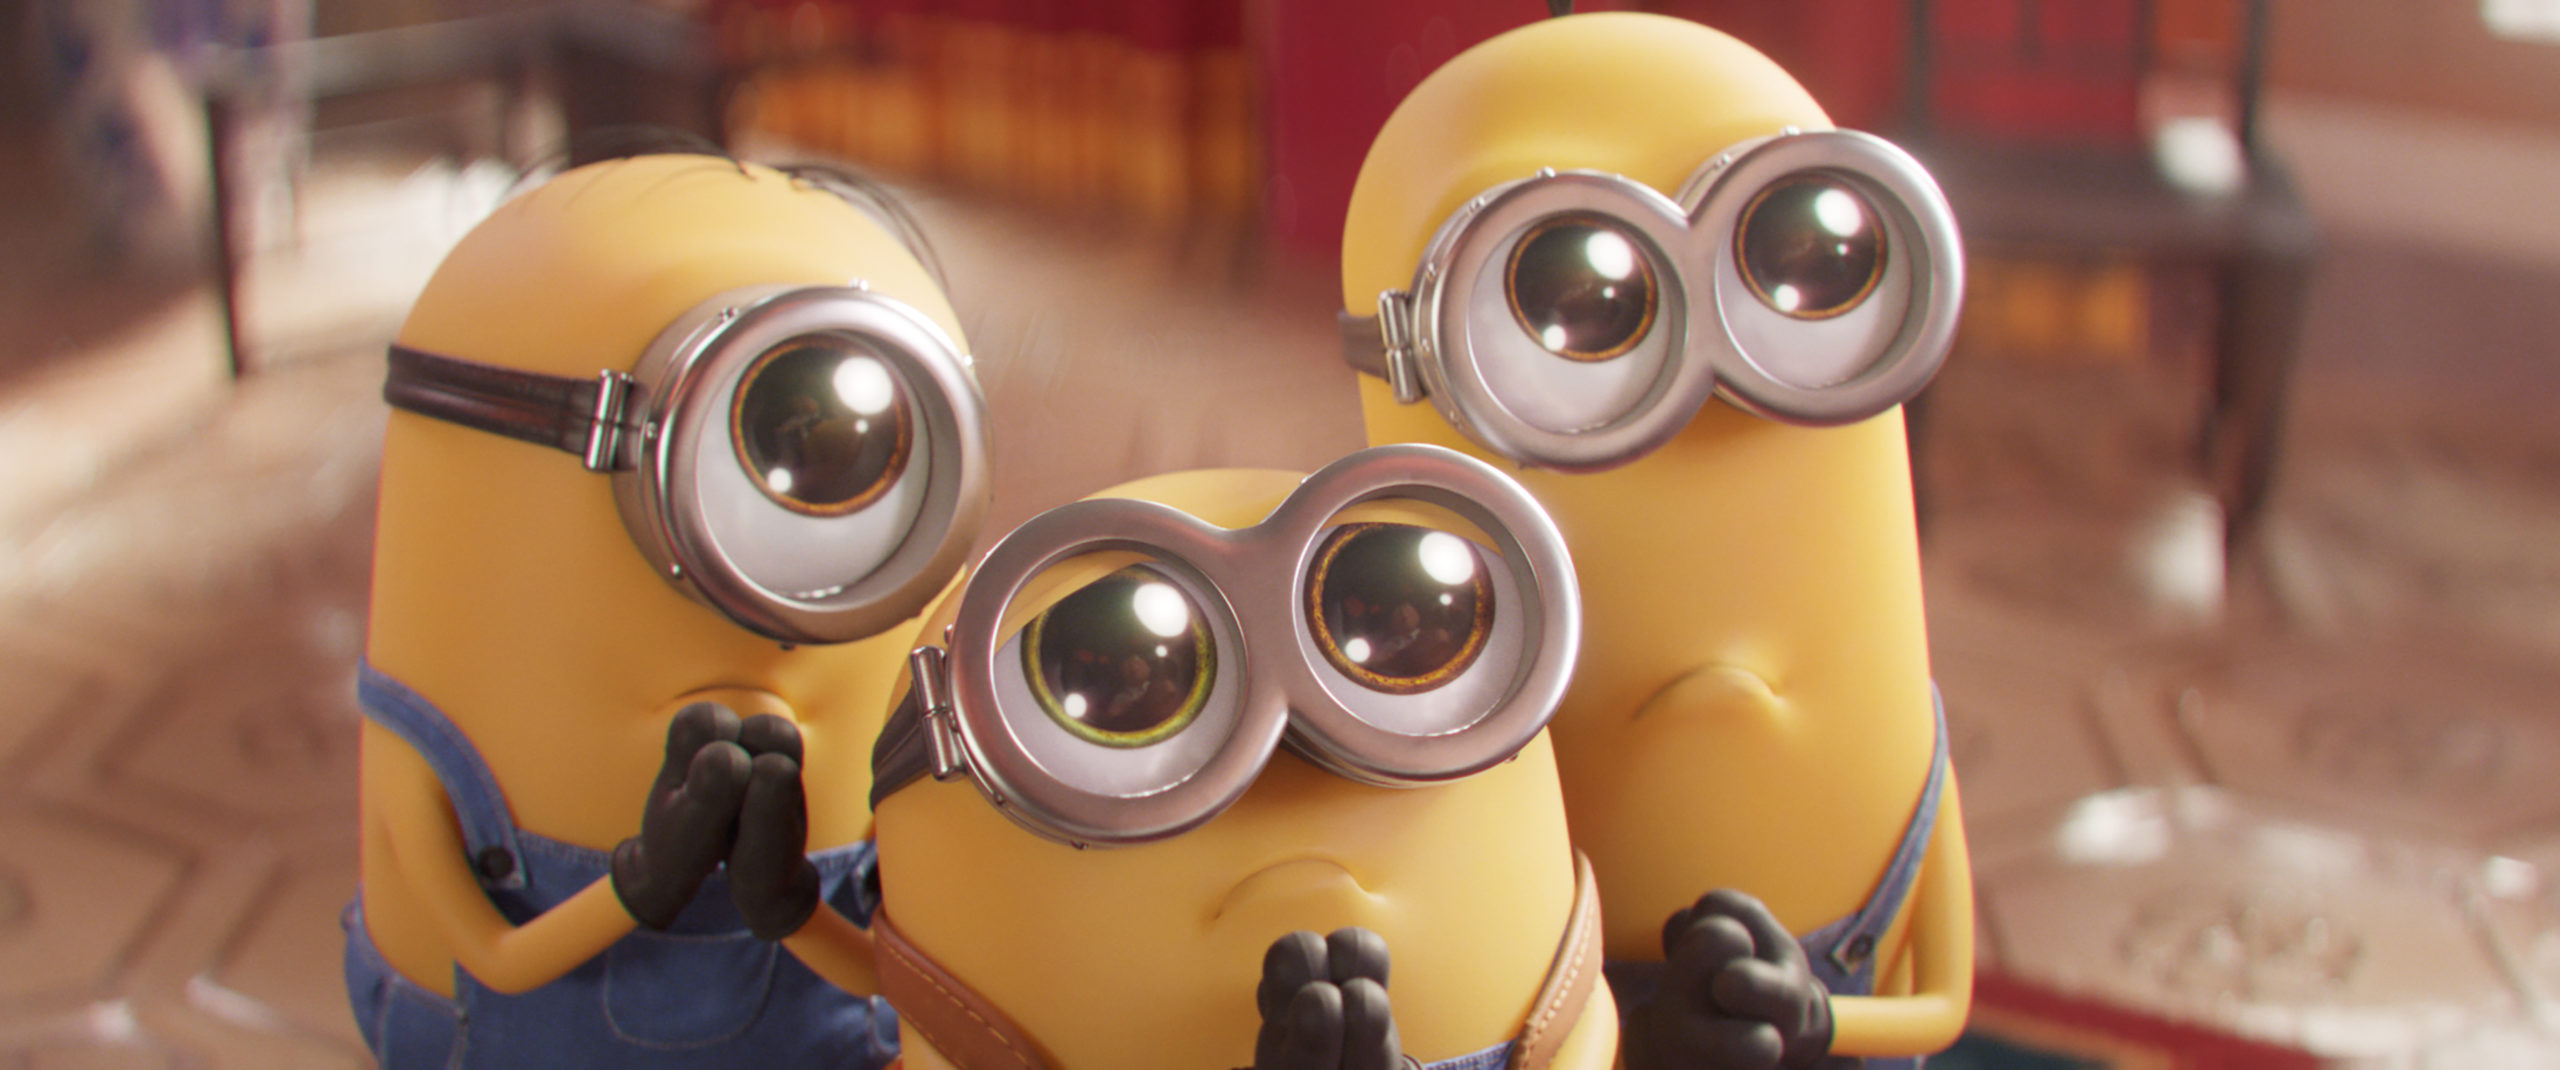 ‘Minions’ set box office on fire with $108.5 million debut despite sustained COVID cases: 'Families feel very comfortable bringing all their kids to the theater'